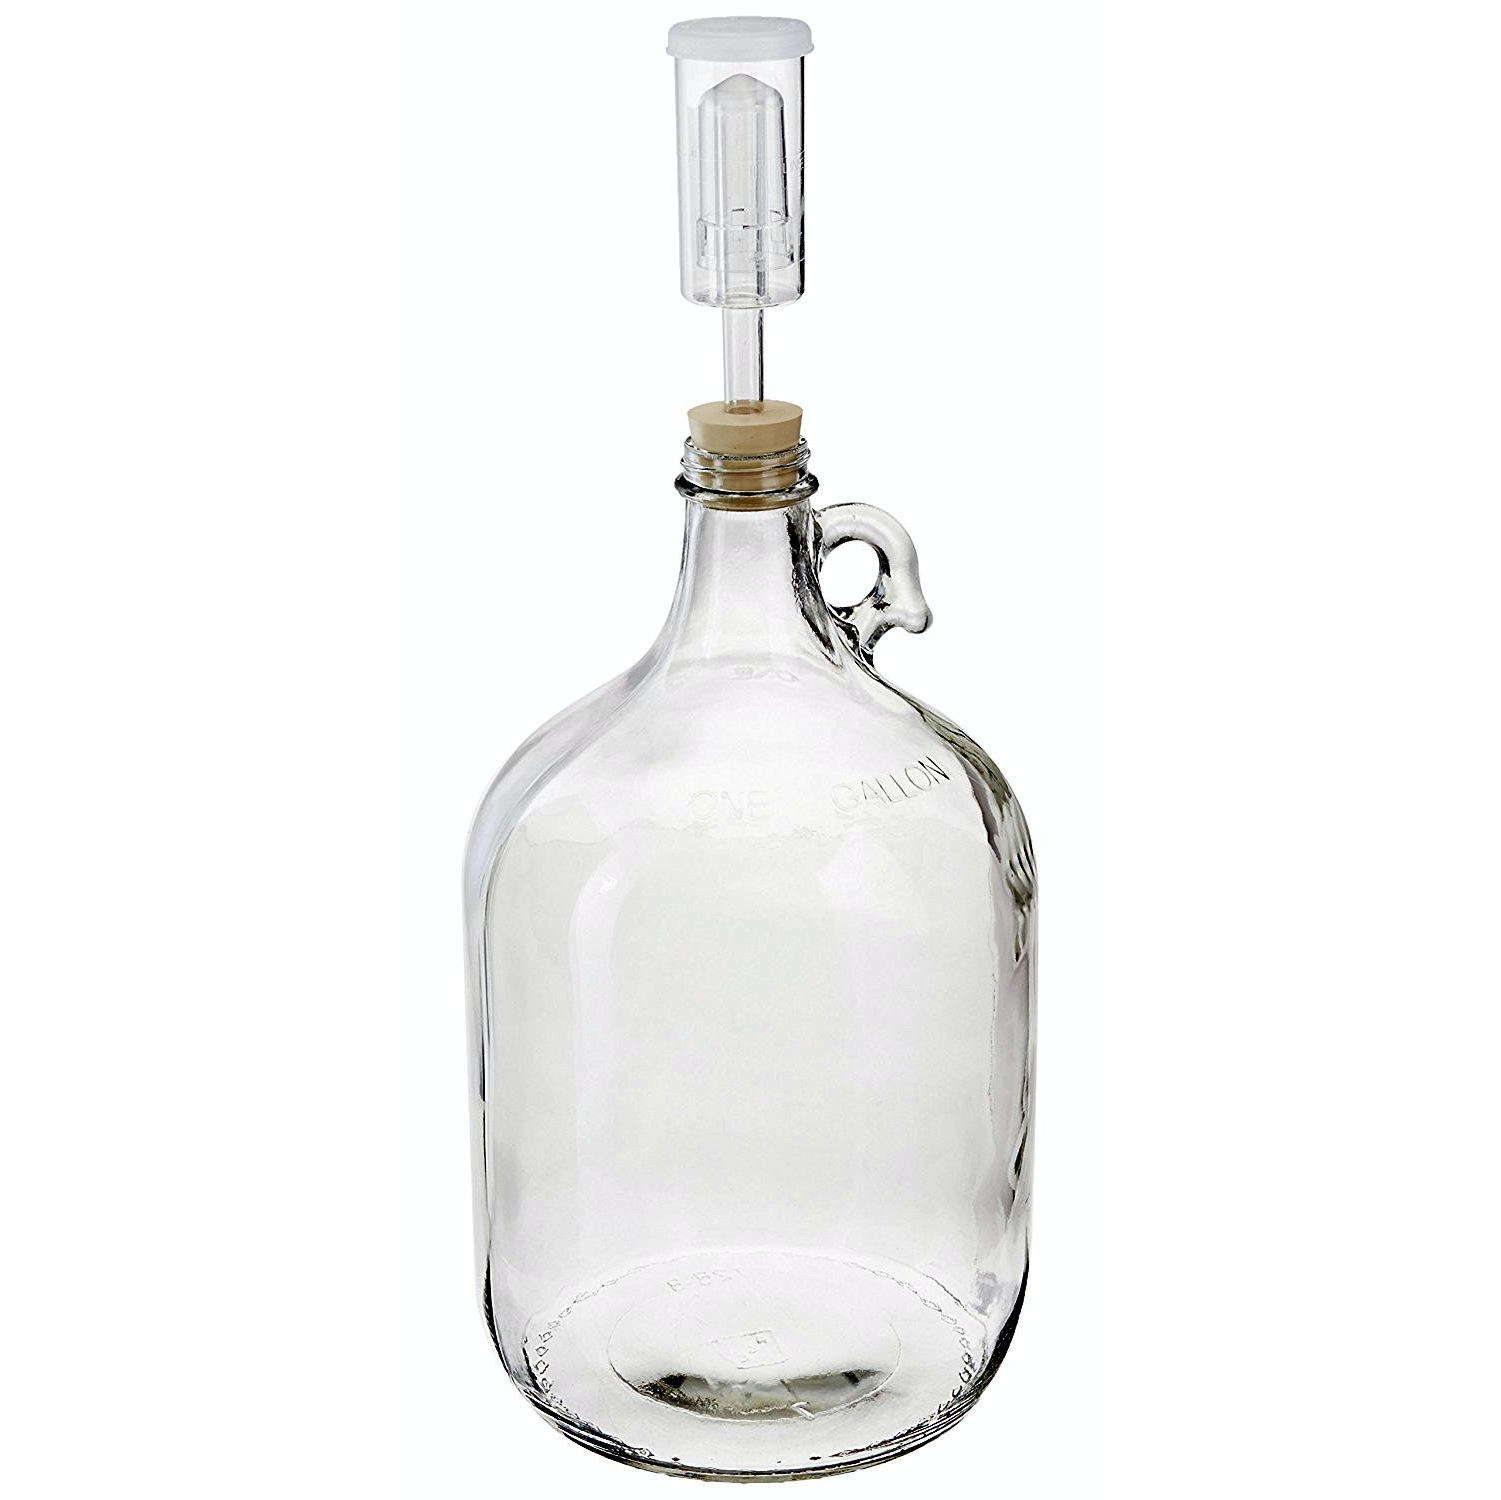 Dicunoy 1 Gallon Glass Jugs, 128 OZ Large Fermenting Jug with Seal Lid,  Wine Growler Carboy Bottle w…See more Dicunoy 1 Gallon Glass Jugs, 128 OZ